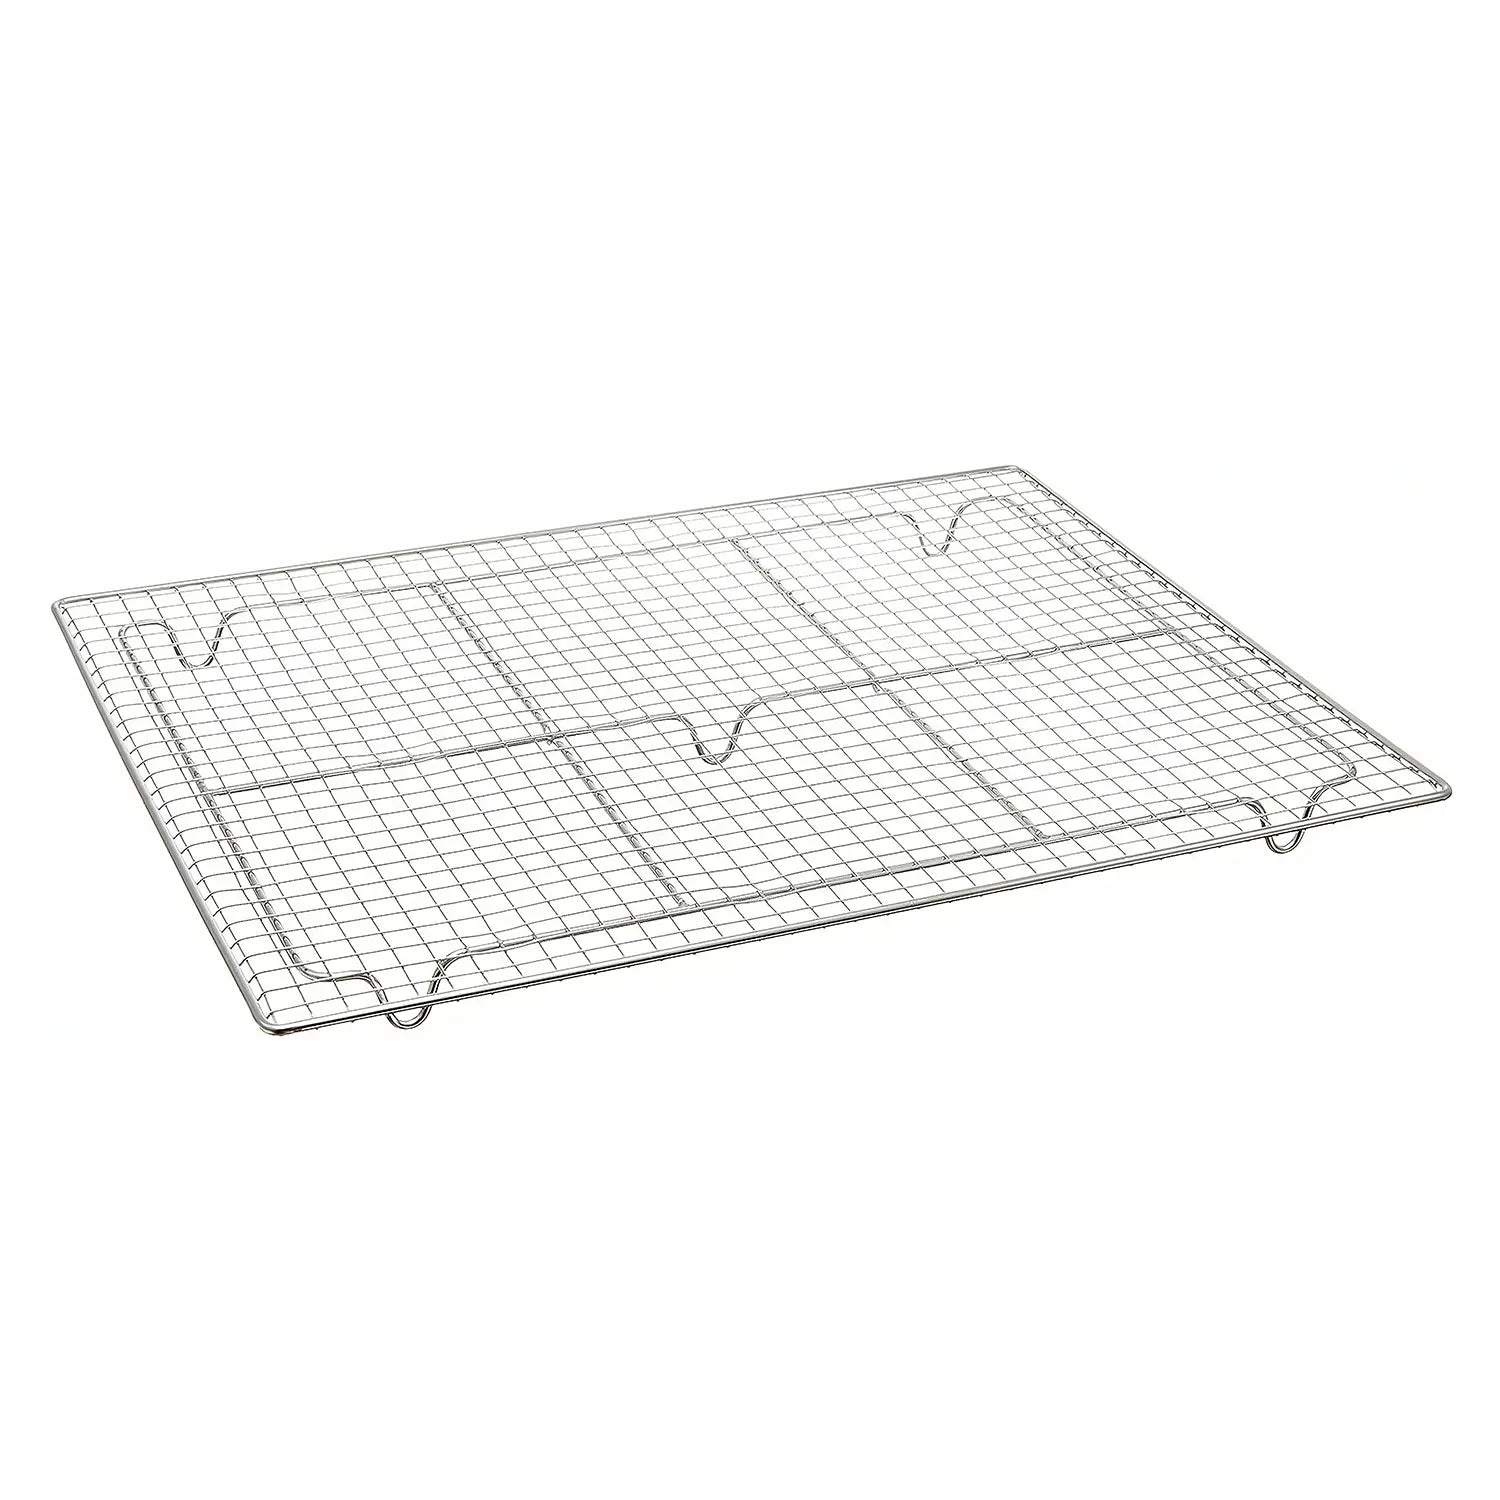 TIGERCROWN Cake Land Stainless Steel Bench Scraper with Scale